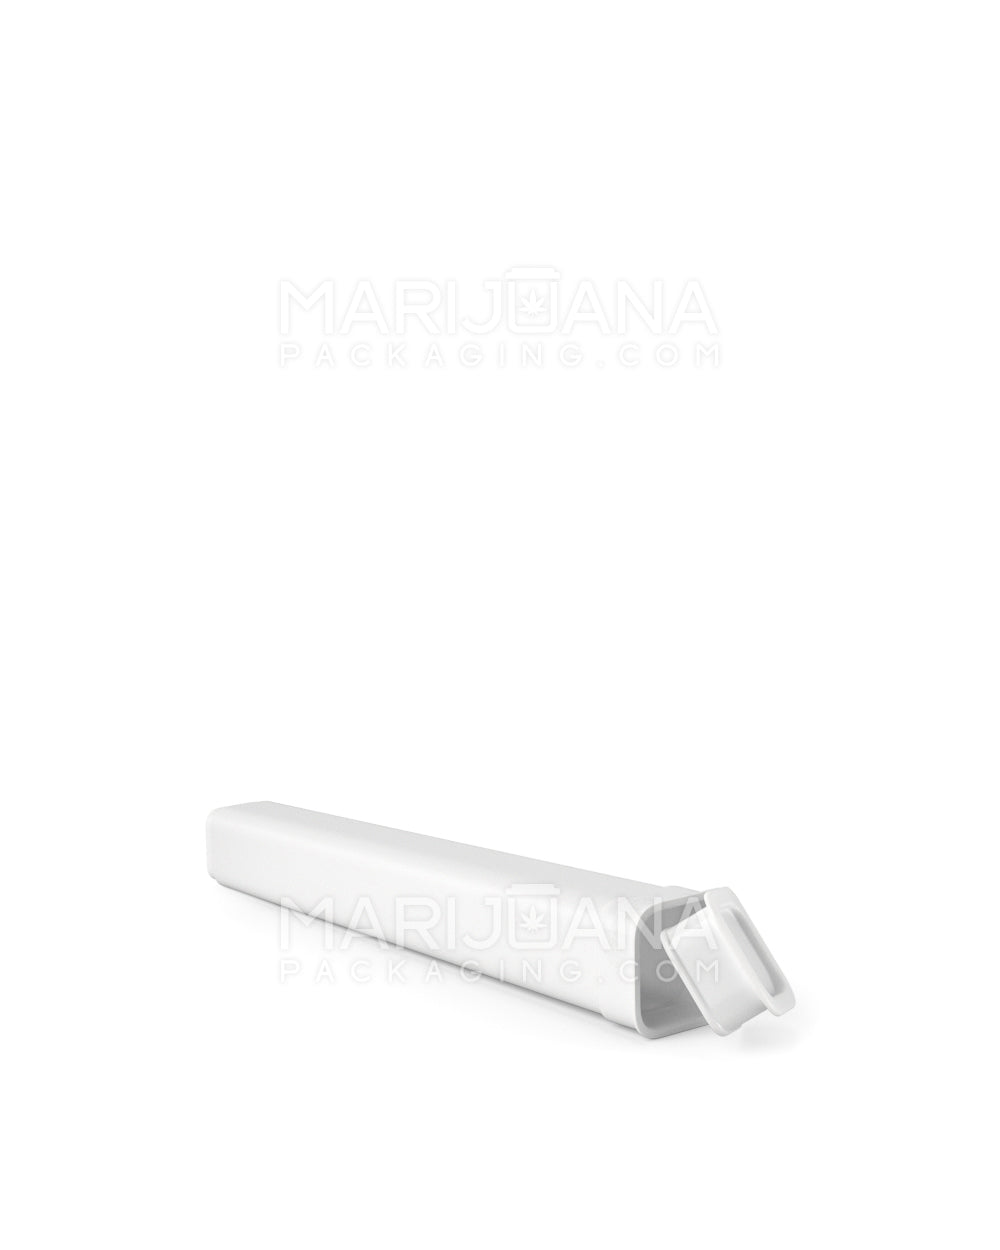 POLLEN GEAR | 100% Recyclable Opaque Pop Box Pop Top Plastic Pre-Roll Tubes | 119mm - White - 1840 Count - 6